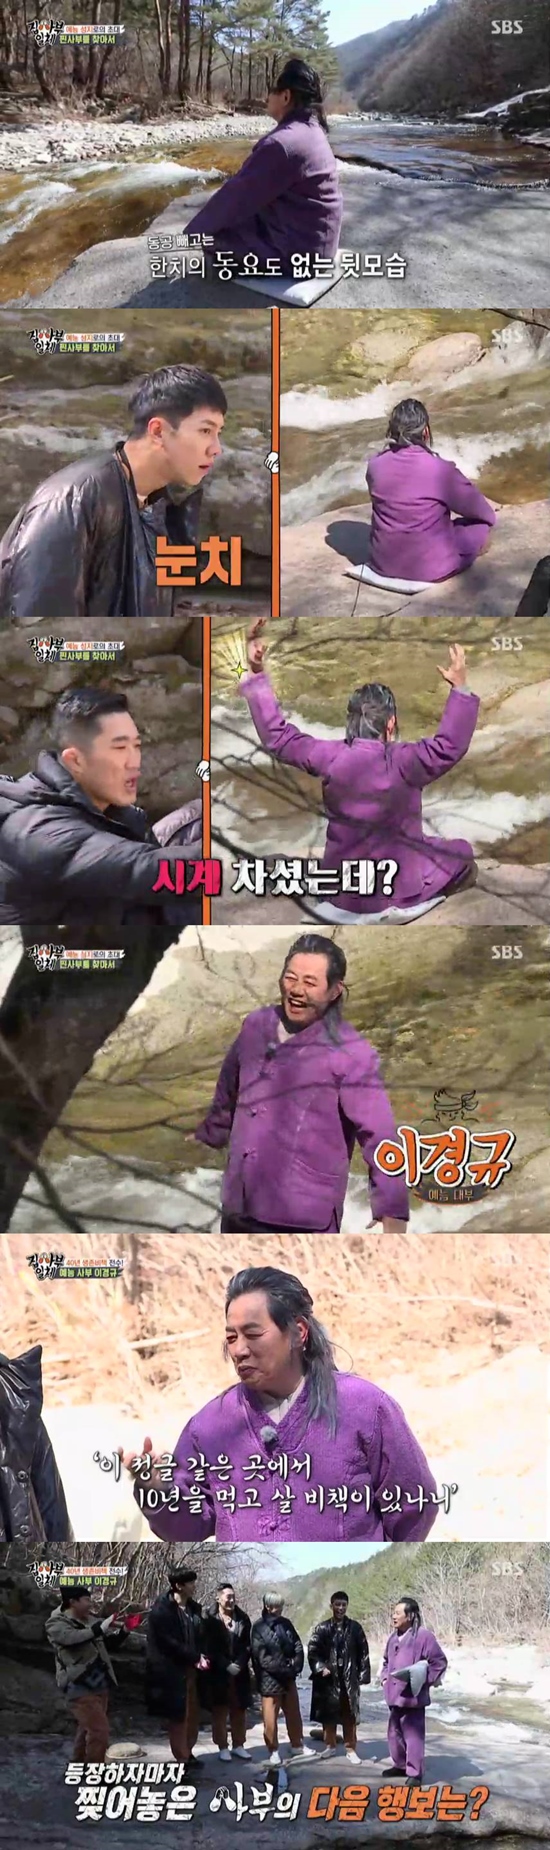 Kim Min-soo lost one side of his testicle during the martial arts Kyonggi, Confessions said.Entertainment The Godfather Lee Kyung-kyu won the best one minute by raising expectations just by appearing.According to Nielsen Korea, a TV viewer rating company on the 29th, SBS All The Butlers TV viewer ratings in the metropolitan area recorded 5.5% in the first part and 6.5% in the second part, 2.9% in the topic and competitiveness index, and 8.2% in the highest TV viewer ratings per minute.On the day of the show, the long-awaited Failure Stival scene with Master Tak Jae-hun, Lee Sang-min, Failure Star Ji Suk-jin, Shim Soo-chang, Kim Min-soo, Jang Dong-min and Solbi was released.First, Tak Jae-hun said, There is no bad Failure in this world.Failure is part of the success, he said. The purpose of the Failure Festival is to come out of Failures experience and support Failure stars re-Top Model. Lee Sang-min said, I hope we will be a big cheer for the tired people.In addition, the King Failure, who gives strength to the tired Failure people, was given a subsidy of 1 million won to burn the Failure stars.Failure stars have been laughing at the extraordinary Failure story, such as the investment Failure and the billion-dollar jewel fraud that have been going through.In particular, Kim Min-soo shocked Failure stars by saying that he lost one testicle during the martial arts Kyonggi.Kim Min-soo said, I was hit by the opponents kick in the second round, but the plastic foul cup, which is a players protective tool, was broken.Then he was hit very strongly in the fourth round. I wanted something to be wrong.Nevertheless, Kim Min-soo said he took a three-minute break and continued Kyonggi.Kim Min-soo said, I did not even know it was sick at the time. The members admired that it is a great thing to play Kyonggi again when it is a pain that can not be imagined.Even Kim Min-soo was cheered by everyone who said he won the Kyonggi that day.Kim Min-soo, who went to the hospital in an ambulance, applauded the story that he had undergone surgery to remove the blood from his legs, saying, I have survived and become a father of two children.Also on this day, All The Butlers Lee Seung-gi, Yang Se-hyeong, Shin Sung-rok, Jung Eun-woo, Kim Dong-hyun and Failure Star Ji Suk-jin, Shim Soo-chang, Kim Min-soo, Jang Dong-min and Solbi are Tak Jae-hun and Lee Sang Top Model on the extraordinary game - prepared by MinThere are many people who walk the path of hardship and adversity these days.I prepared for the purpose of walking the path together like Thorny Road, and we will walk the way to the end. He introduced the Innocent Thing Field Game.This is the victory of a team that blows more balloons as it passes through Thorny Road, adding that the success is only in front of us when we taste a lot of Failure, endure the trials and finally get out.I will not give up on any Thorny road in front of me, said Jung Eun-woo, who became the Top Model.The team won the Failure Star team with 15 balloons left by Kim Min-soo, although Jung Eun-woo passed the Thorny Road safely and left 11 balloons thanks to the support of the members.Since then, the group Game In the Well has been conducted, and Kim Min-soo has won the final result of Failure King.Kim Min-soo said, I hope I will live like a man like me even if I have an unexpected failure.On the other hand, at the end of the broadcast, members gathered in the mountain of Inje, Gangwon Province were revealed.Is not it a natural master? In front of the members who wondered about the identity of the master, someone who said that he was a master of the master appeared.As he was leading the members to the place where Master is, he explained to Master, Master had a rich movie and honor that was unrivaled when he was in the city, but he entered the school a month ago, saying, I will leave the world before the world abandons me.At the end of the mountain trail along the school, I saw the back of the Master, who was in the valley with a questionable purple dress.The members said, Are you old? And Are you doing that all day? Yang Se-hyeong said, It is only a month old, but it is a geek.The identity of the Master was the entertainment The Godfather Lee Kyung-kyu.Lee Kyung-kyu said, I invited him to this deep mountain to tell me how to live for 10 years in the entertainment industry. He laughed, saying, I eat it day by day for the next 10 years.The scene in which Lee Kyung-kyu appeared in front of the members in the same way as Doin on the day raised expectations and won the best one minute with 8.2% of TV viewer ratings per minute.Photo = SBS